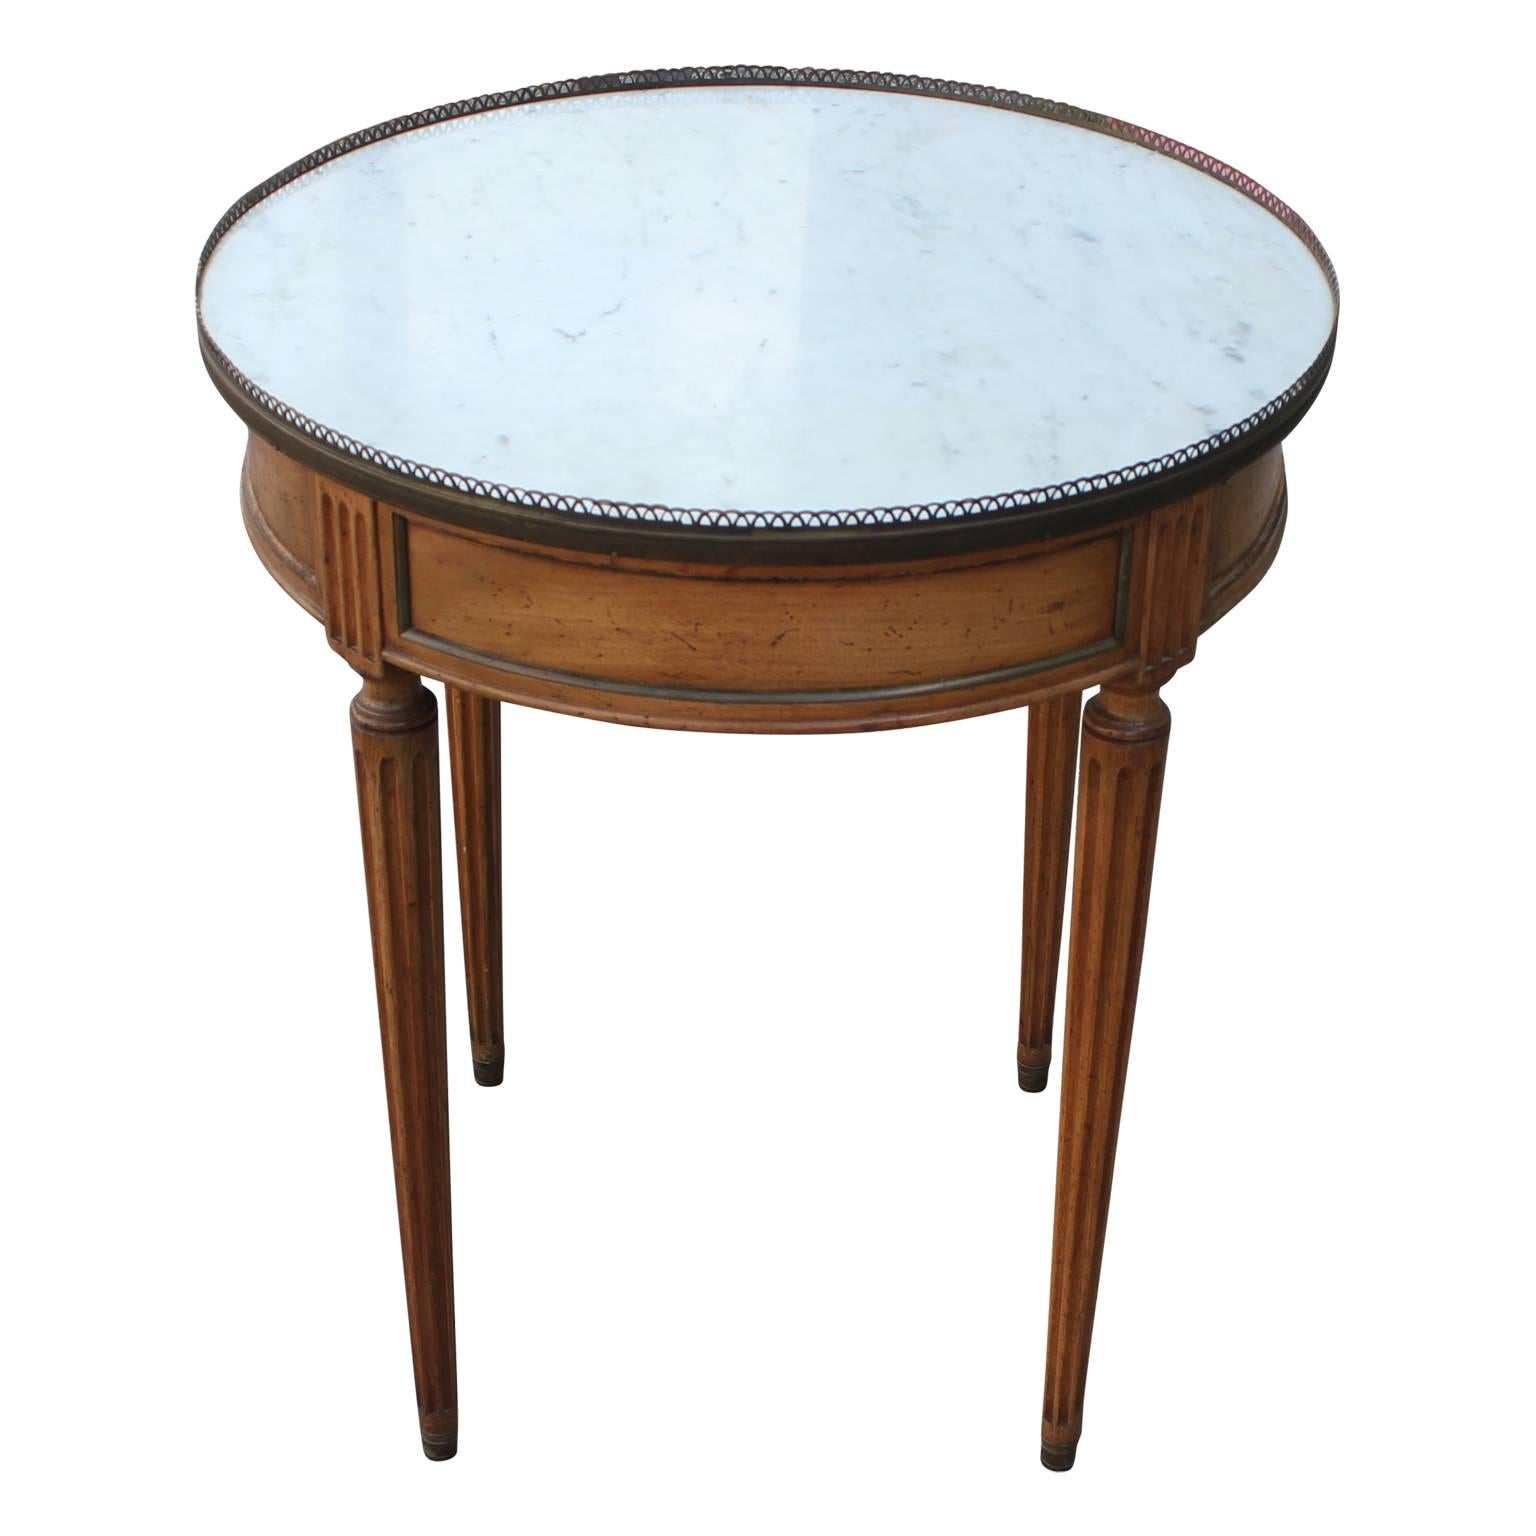 20th century Regency Louis XVI style French marble occasional table. This marble decoration typical to Verde Antico or Marmo di Carrara. The table includes a bronze detail encircling the white and grey marble, both of which highlight the finished